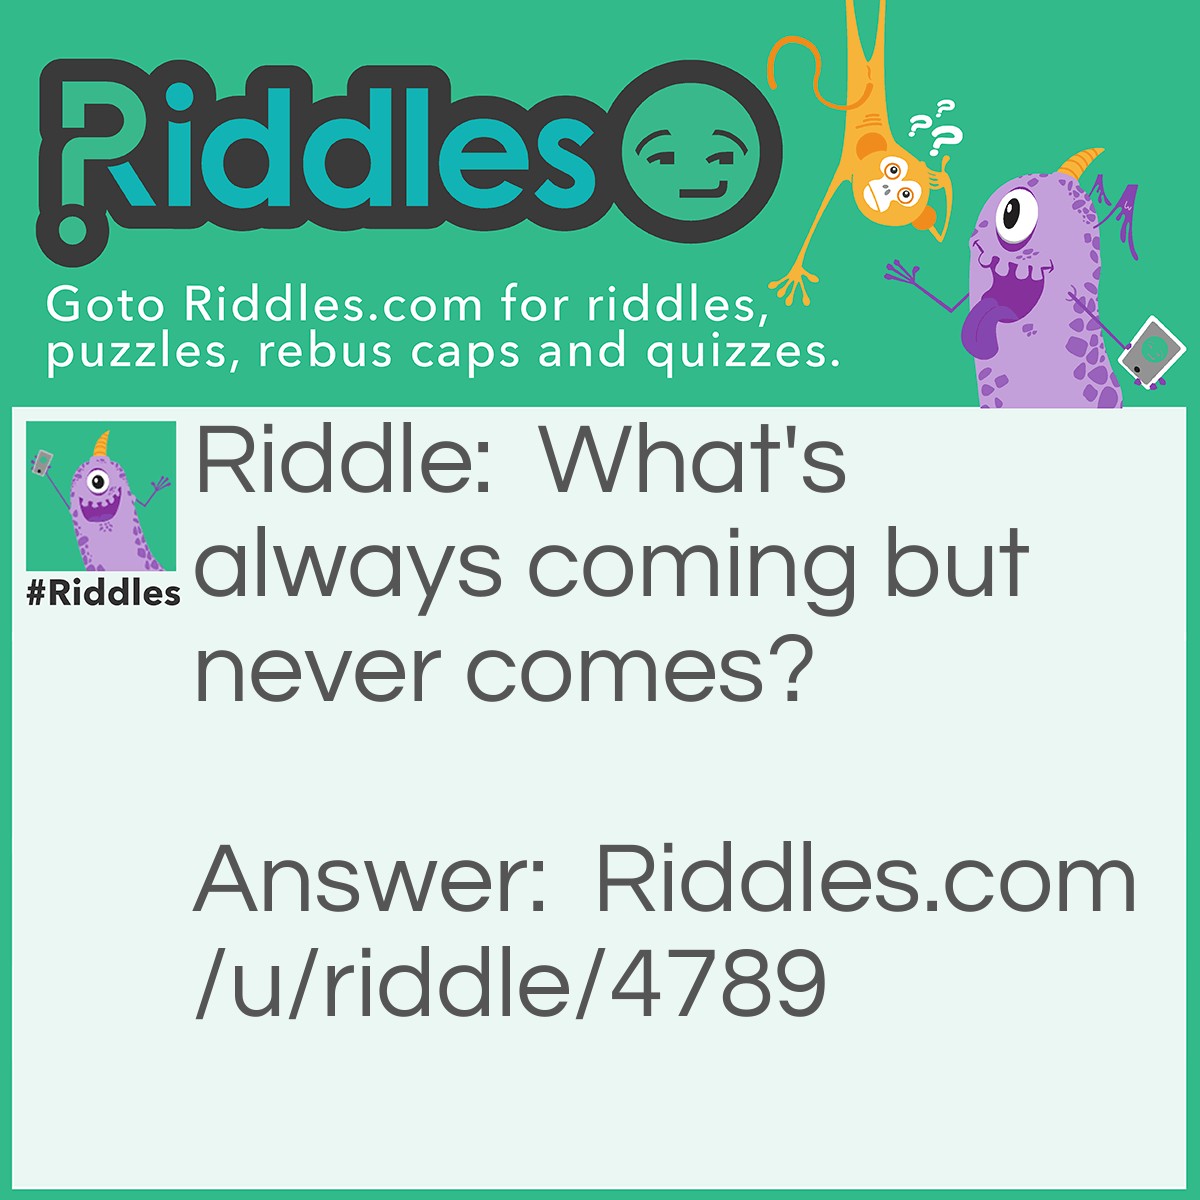 Riddle: What's always coming but never comes? Answer: Tomorrow.